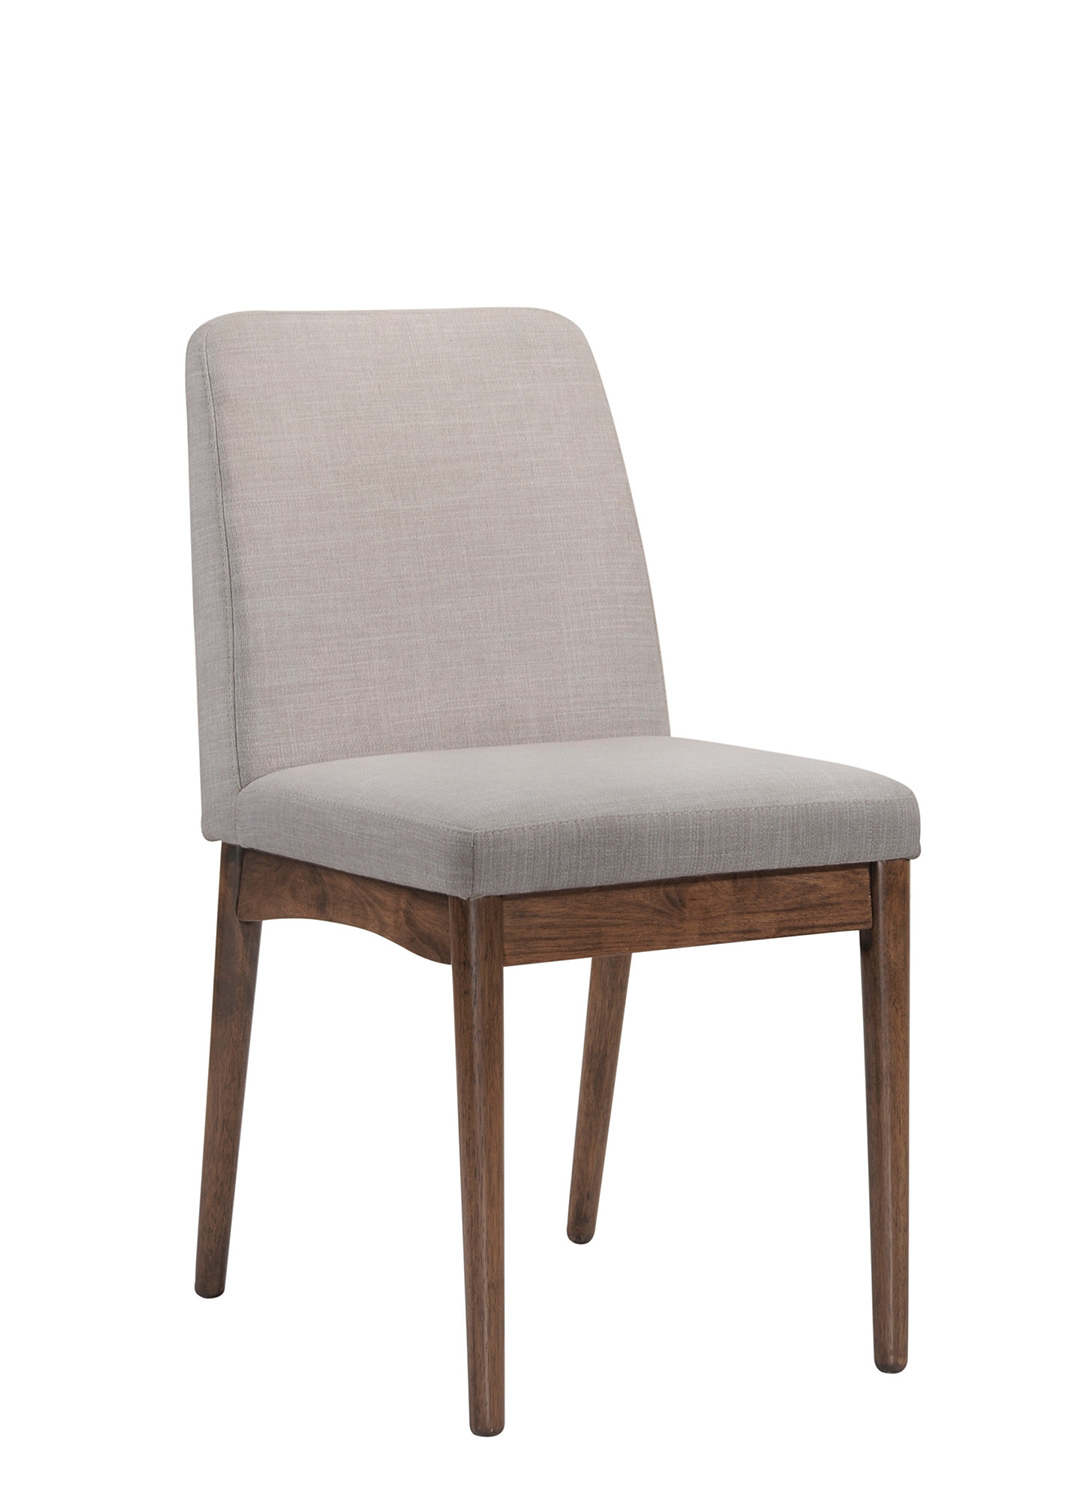 Coaster Pasquil Dining Chair - Latte